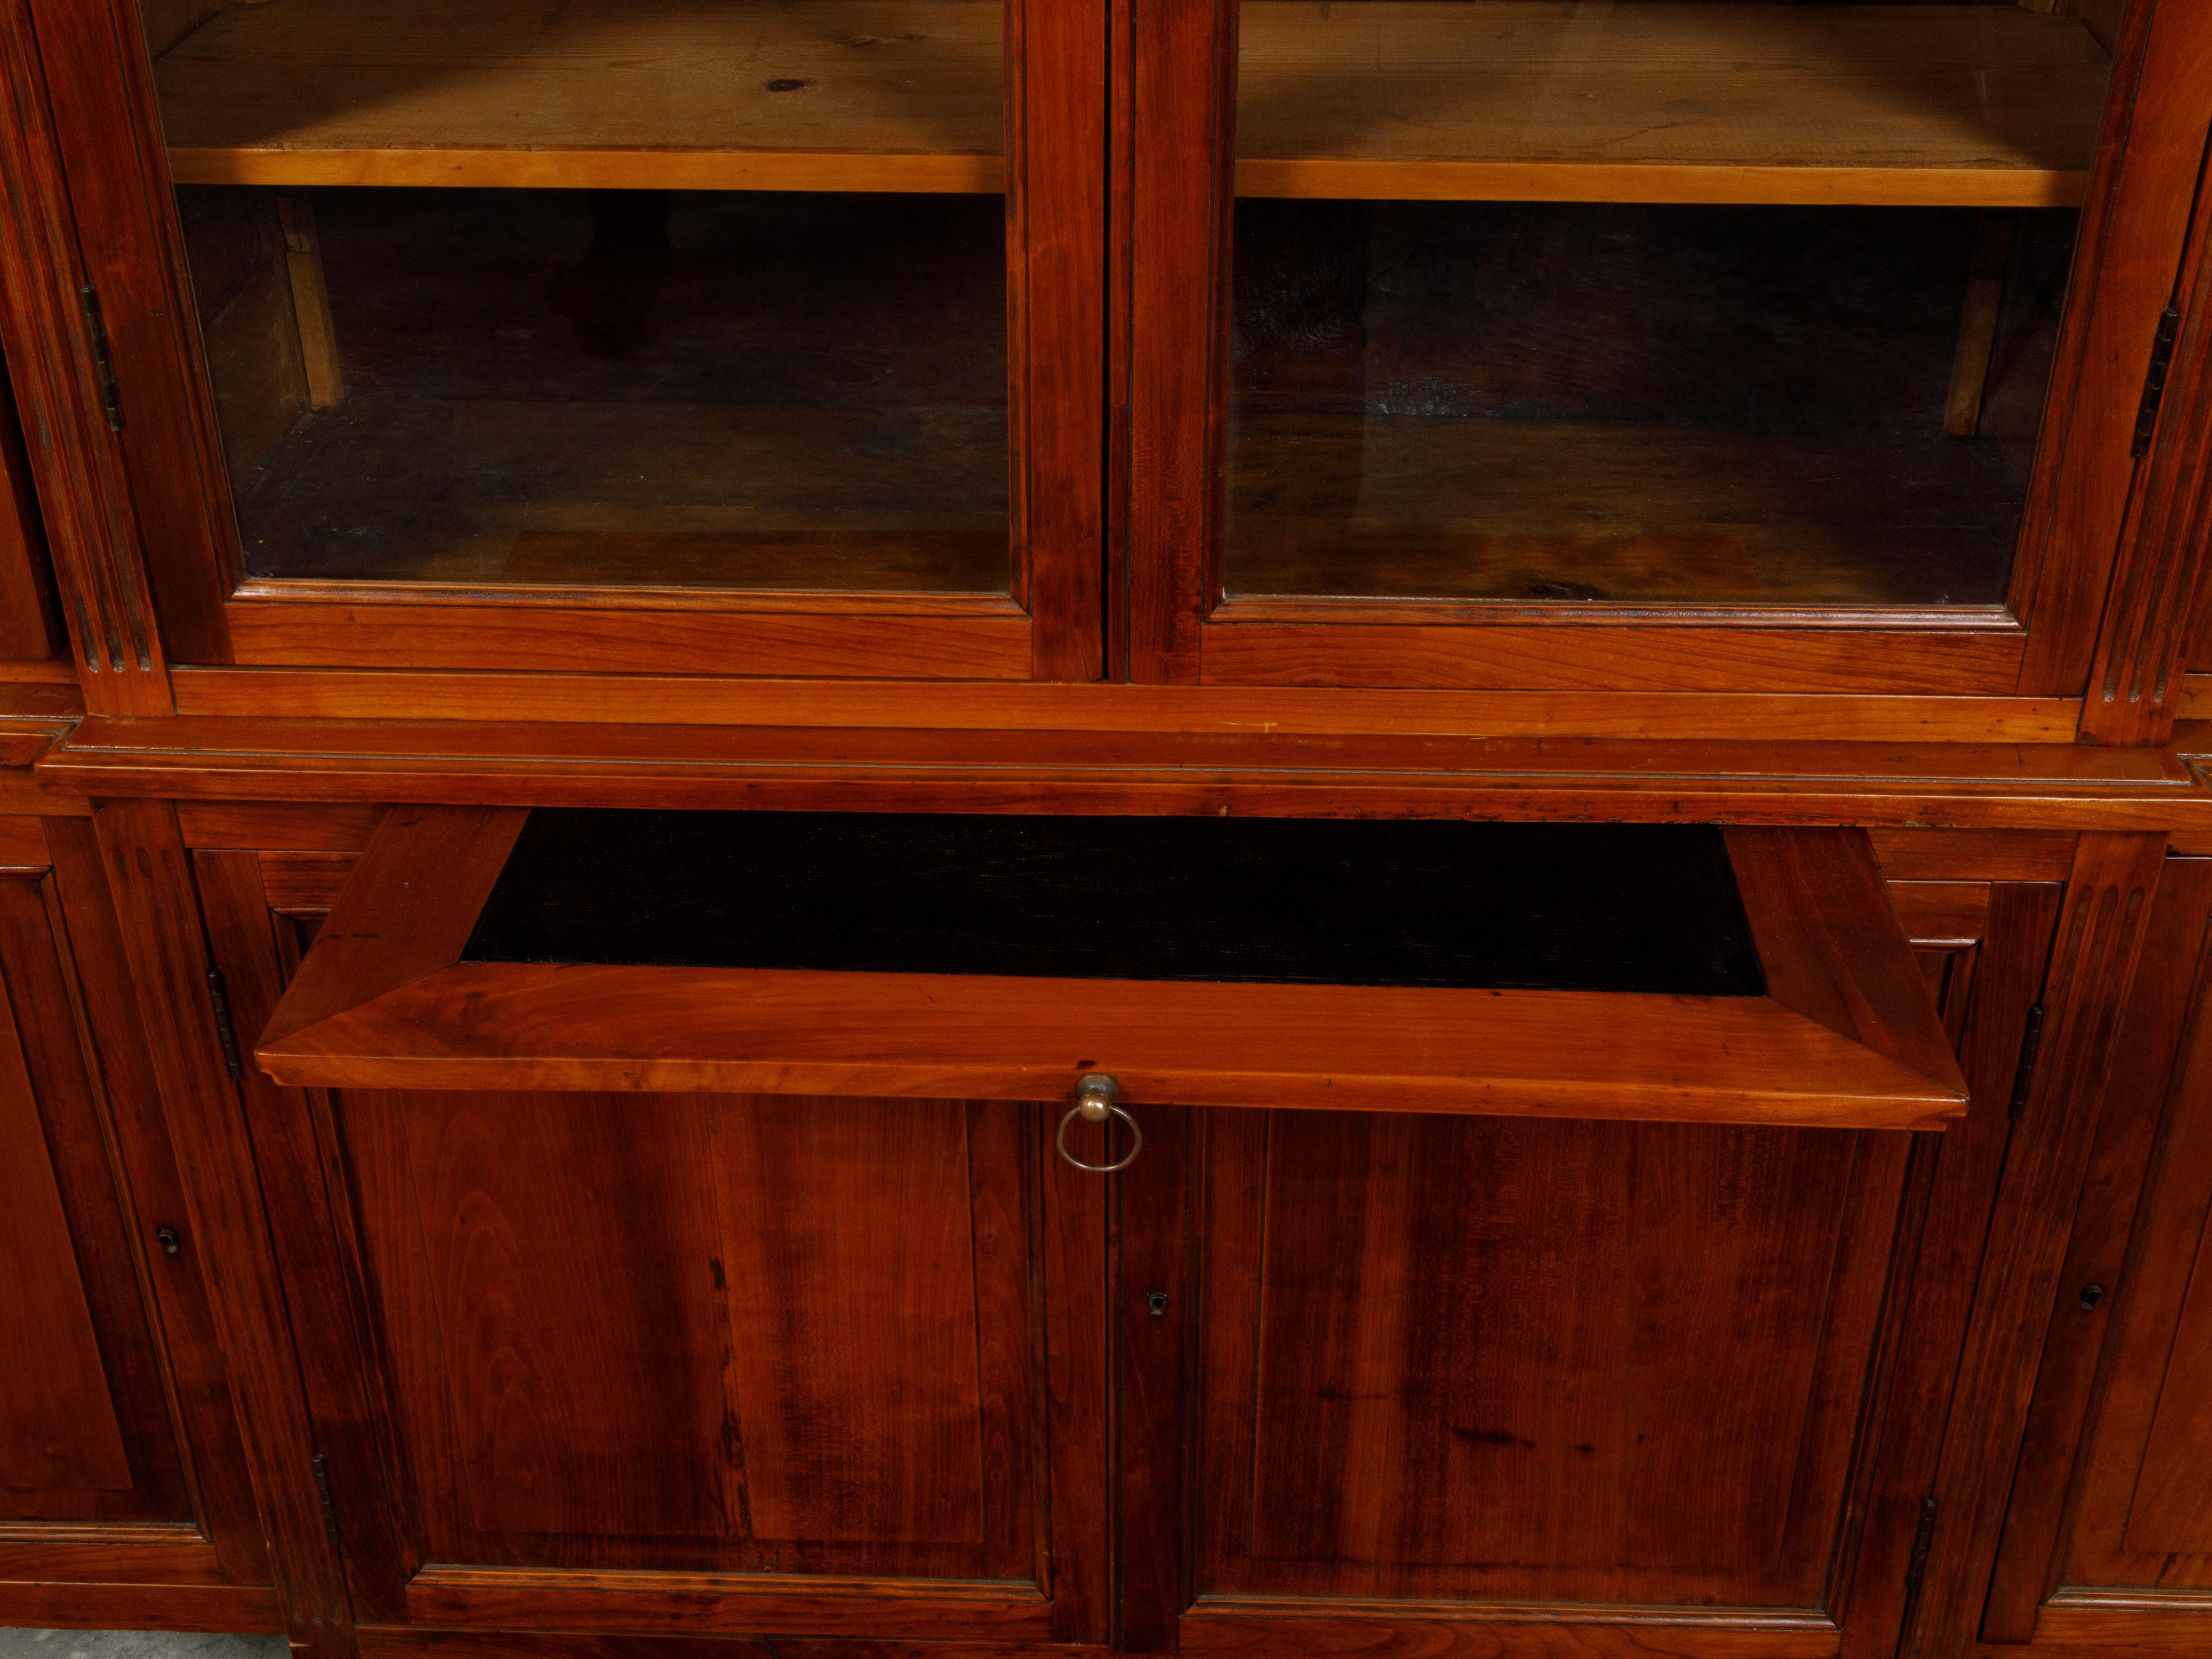 French Restauration Period 1820s Walnut Breakfront Bookcase with Glass Doors For Sale 8